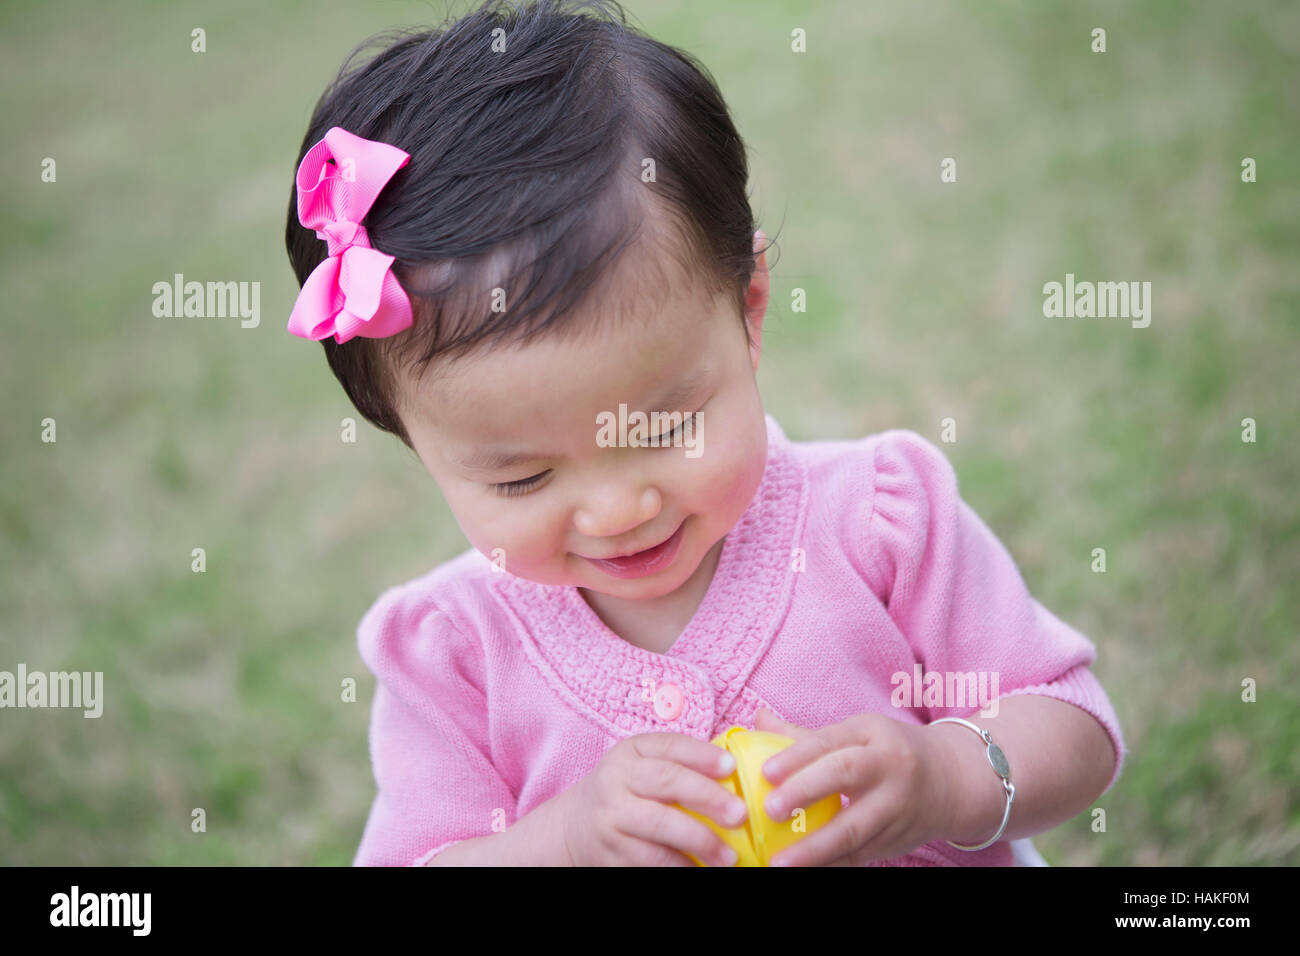 Toddler Girl Smiling while she Opens an Easter Egg Stock Photo